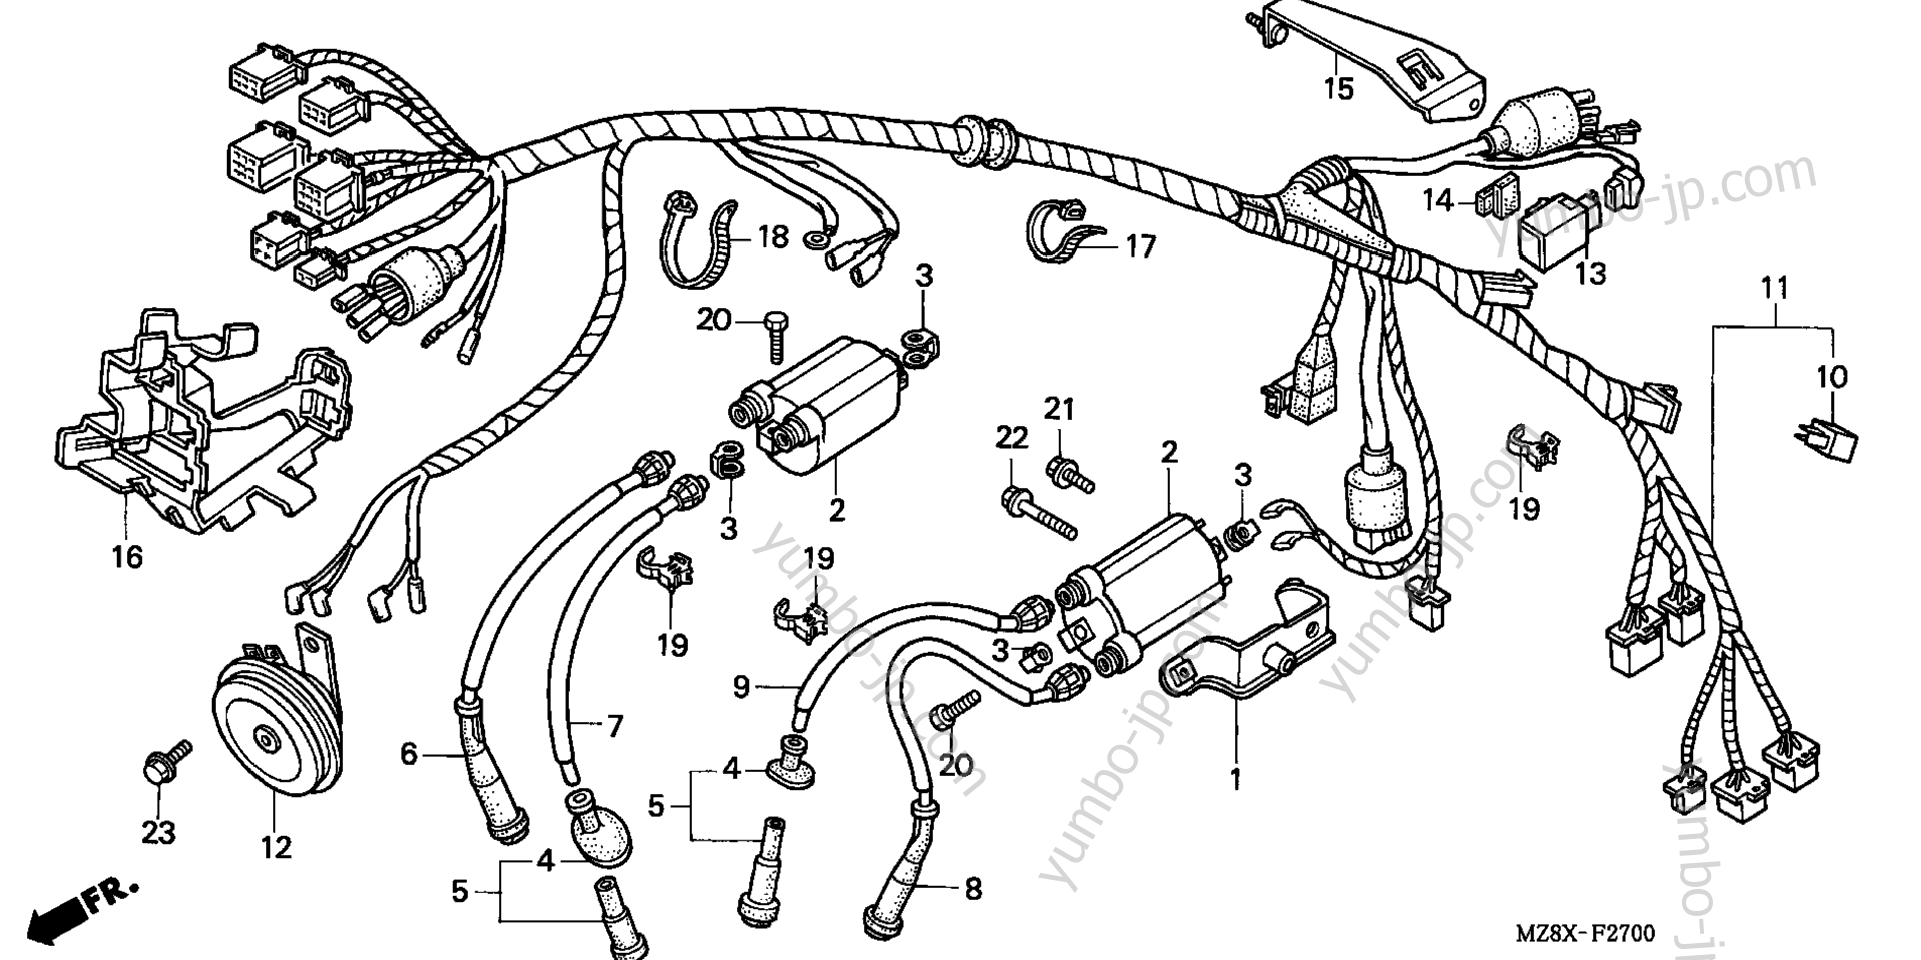 WIRE HARNESS for motorcycles HONDA VT600CD AC 2004 year